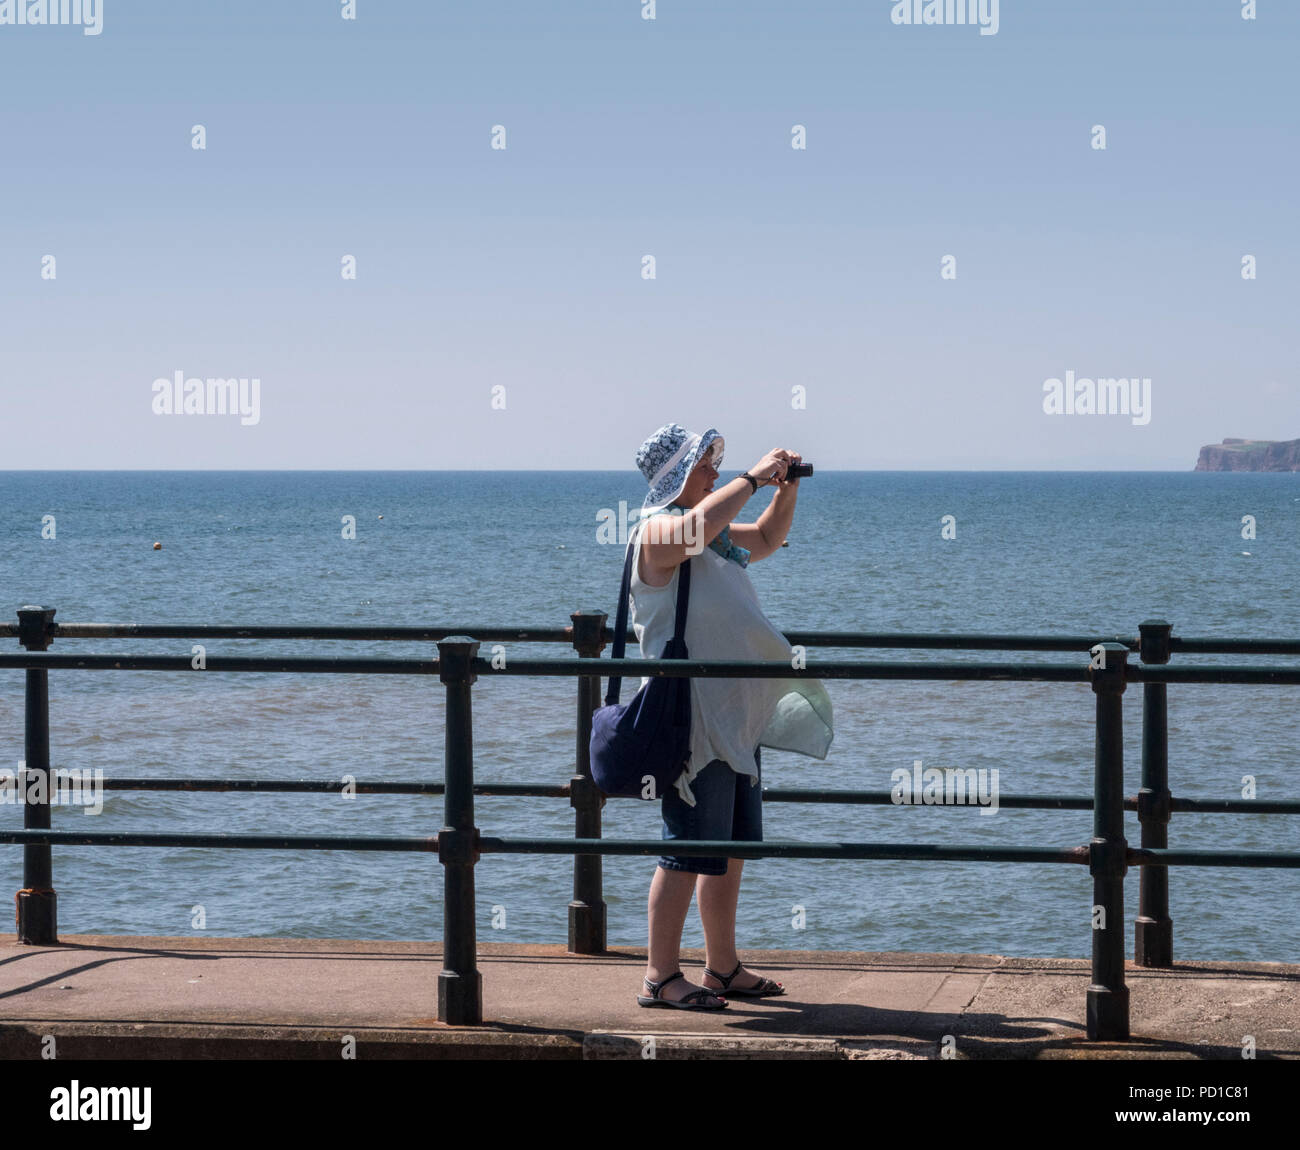 Sidmouth, UK 5th Aug 18 A lady takes pictures on the seafront at Sidmouth as temperatures again soar on the Devon coast. Photo Central / Alamy Live News Stock Photo